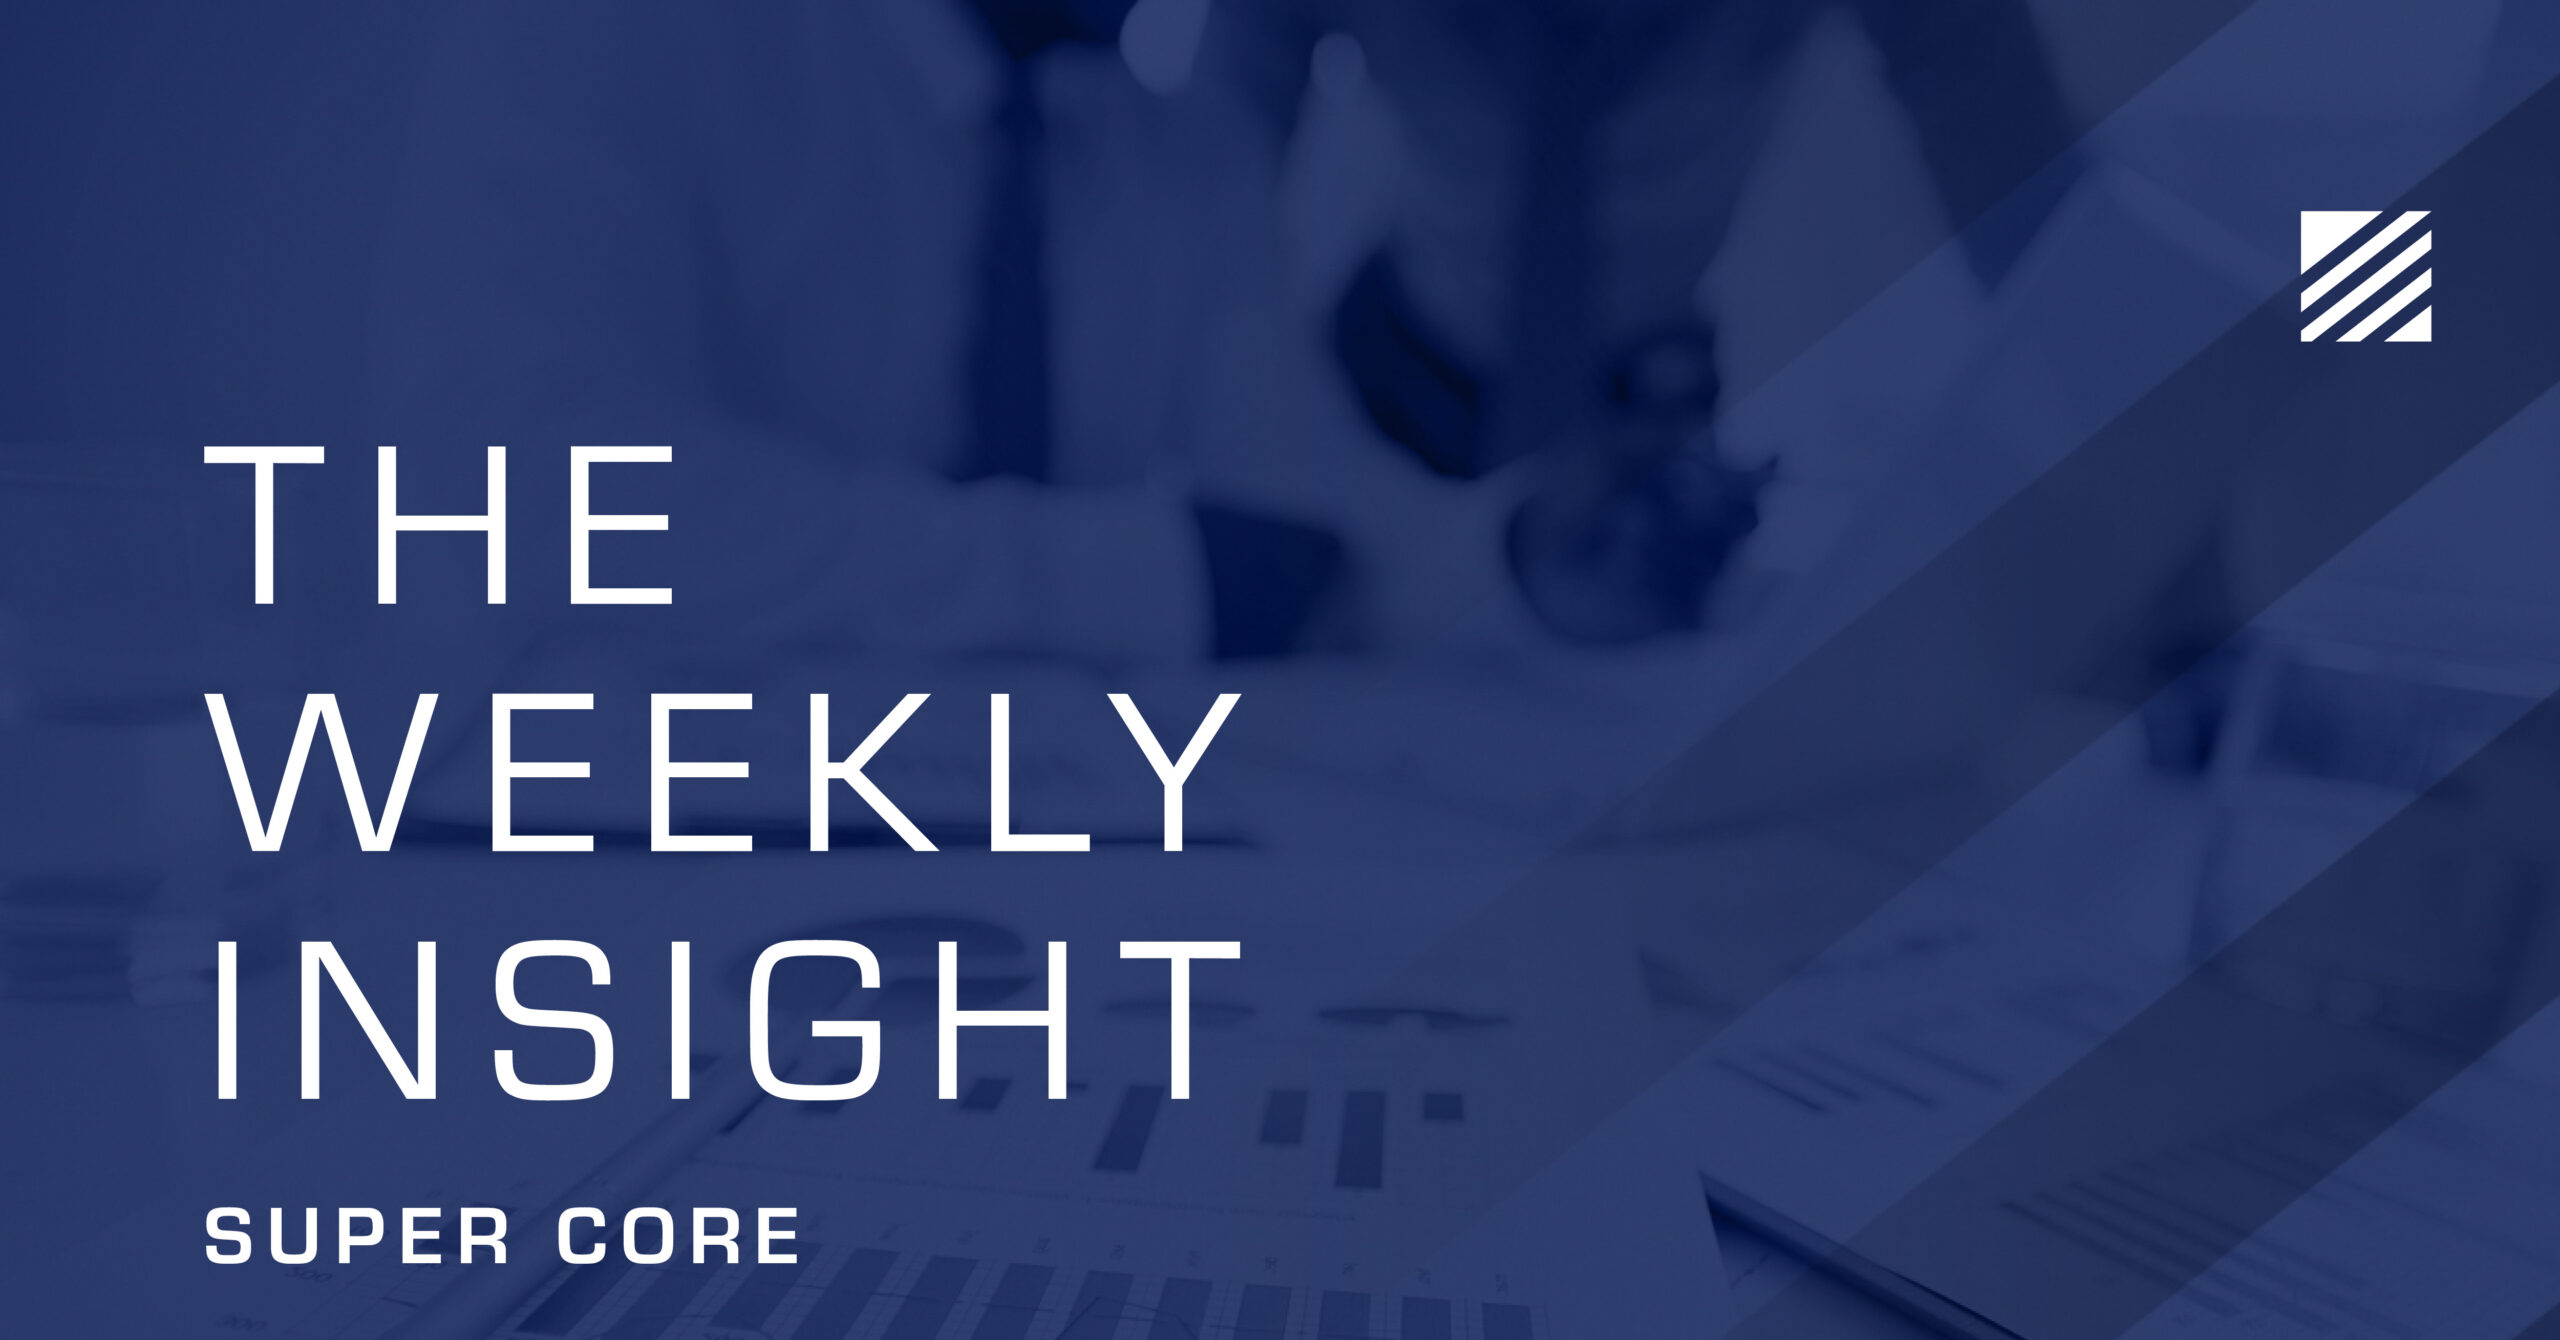 The Weekly Insight: Super Core Graphic